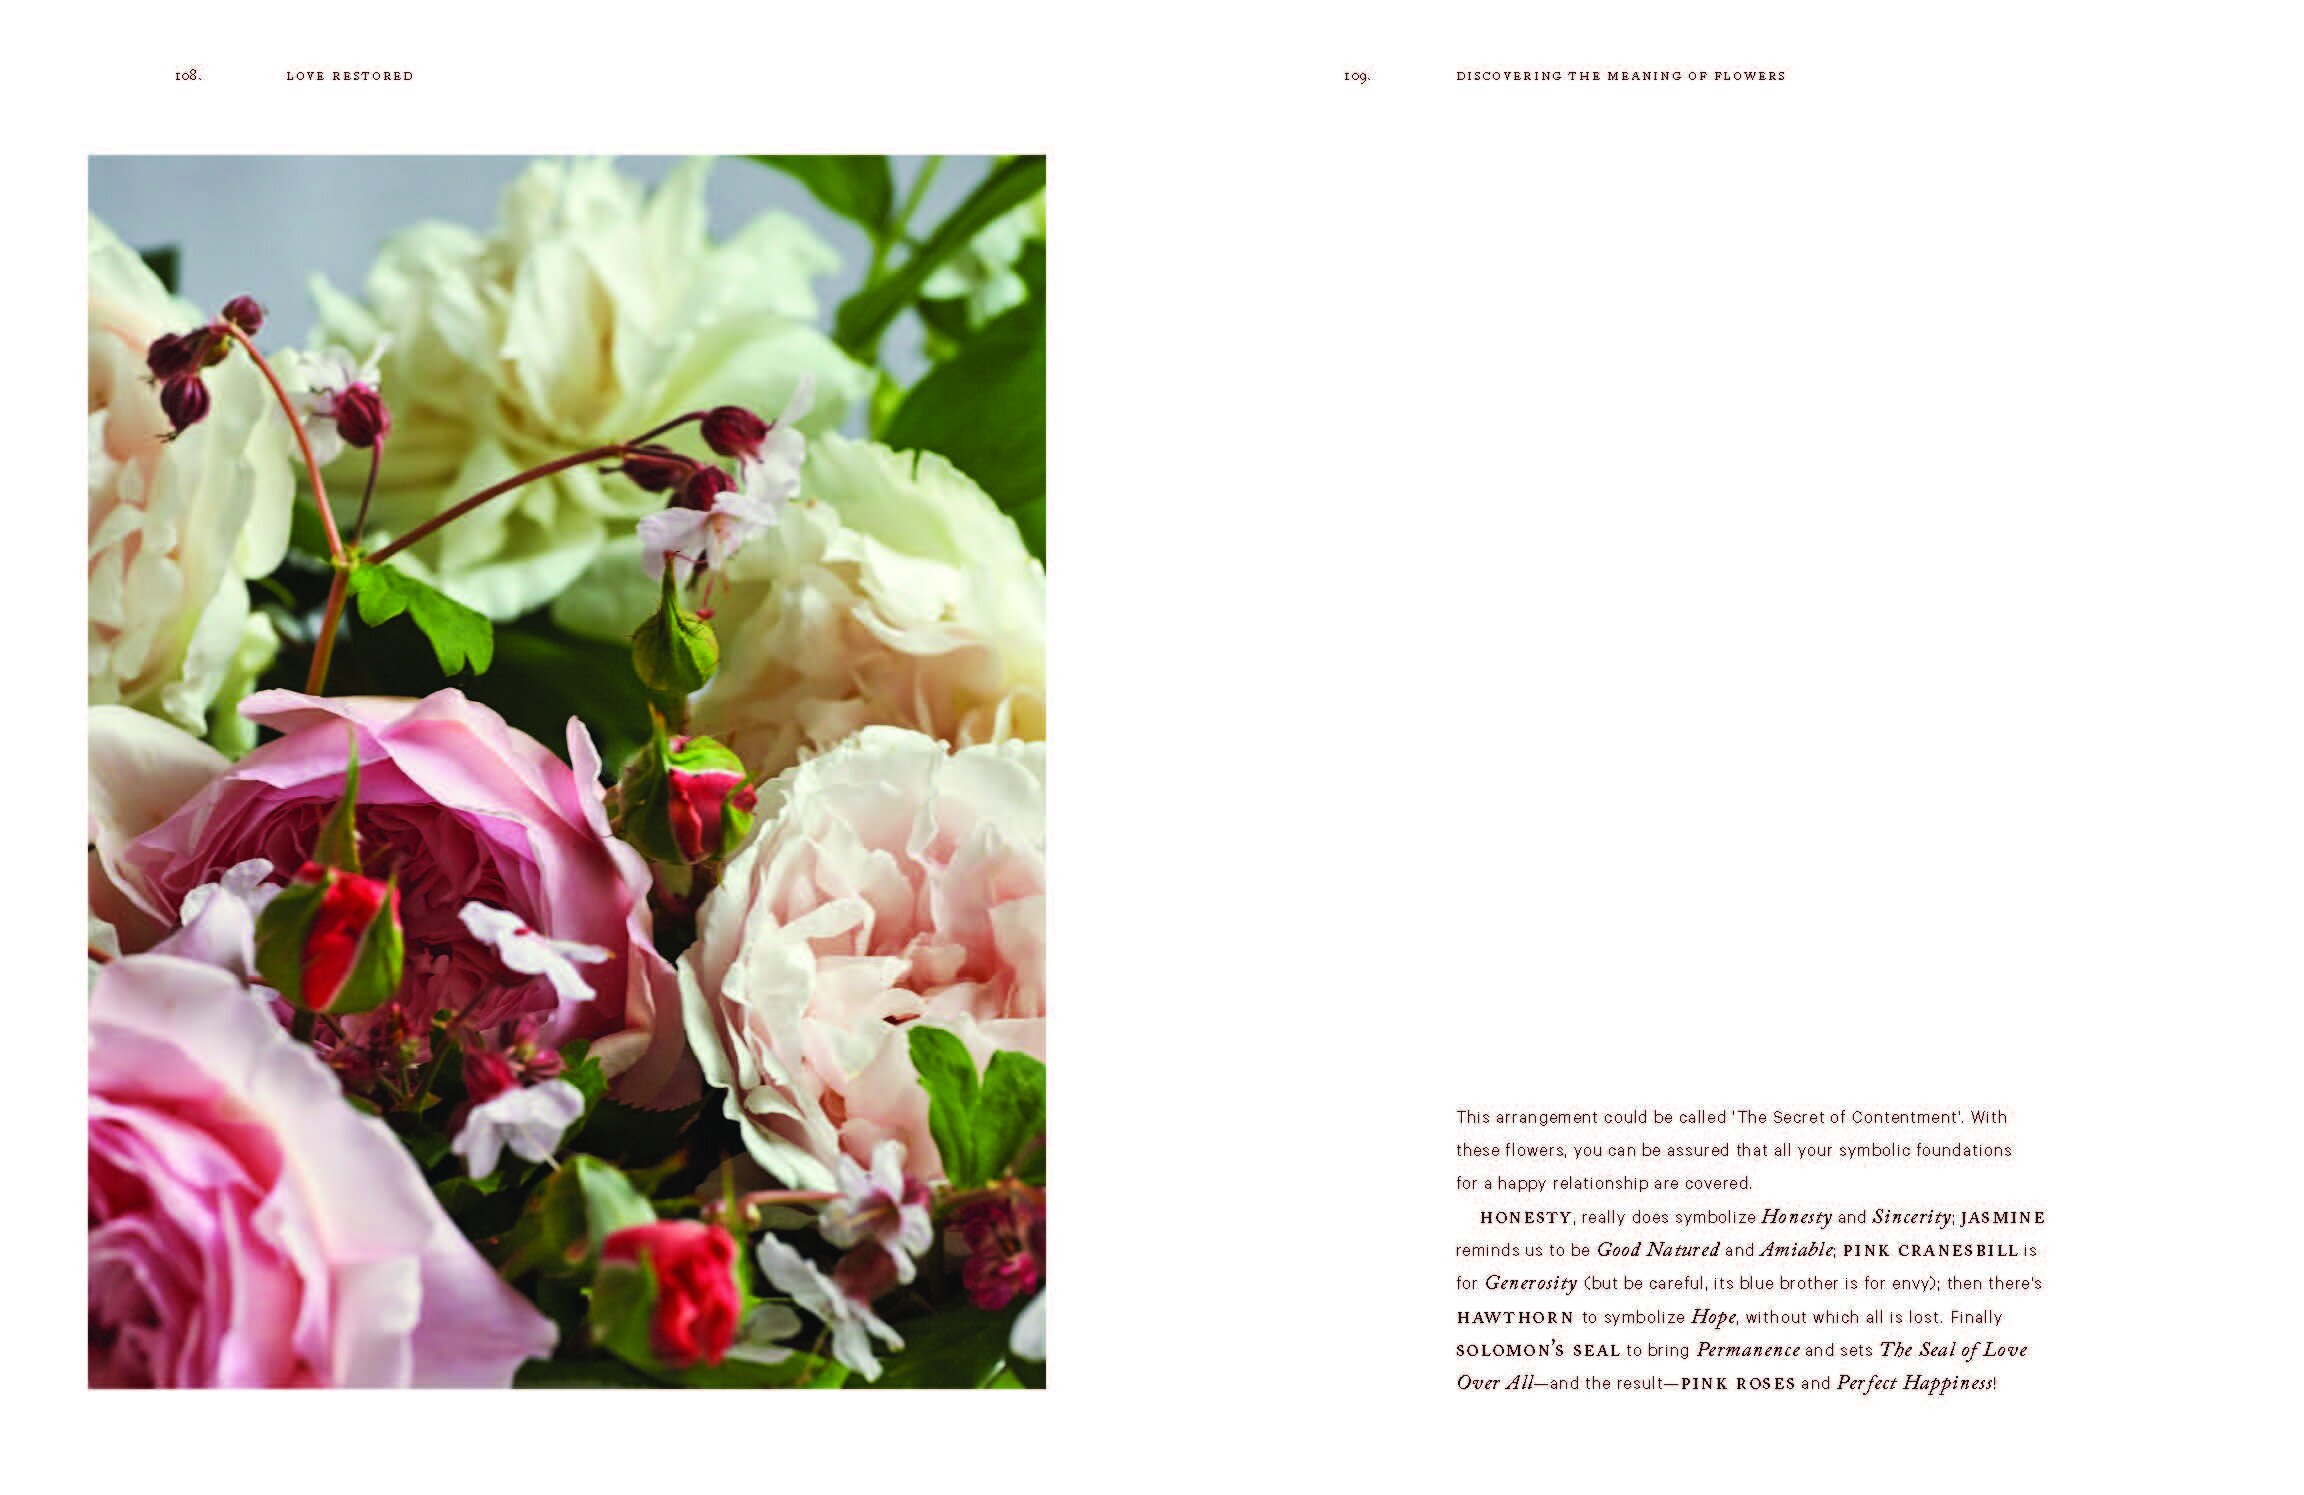 Pages from MeaningofFlowers_low-5.jpg